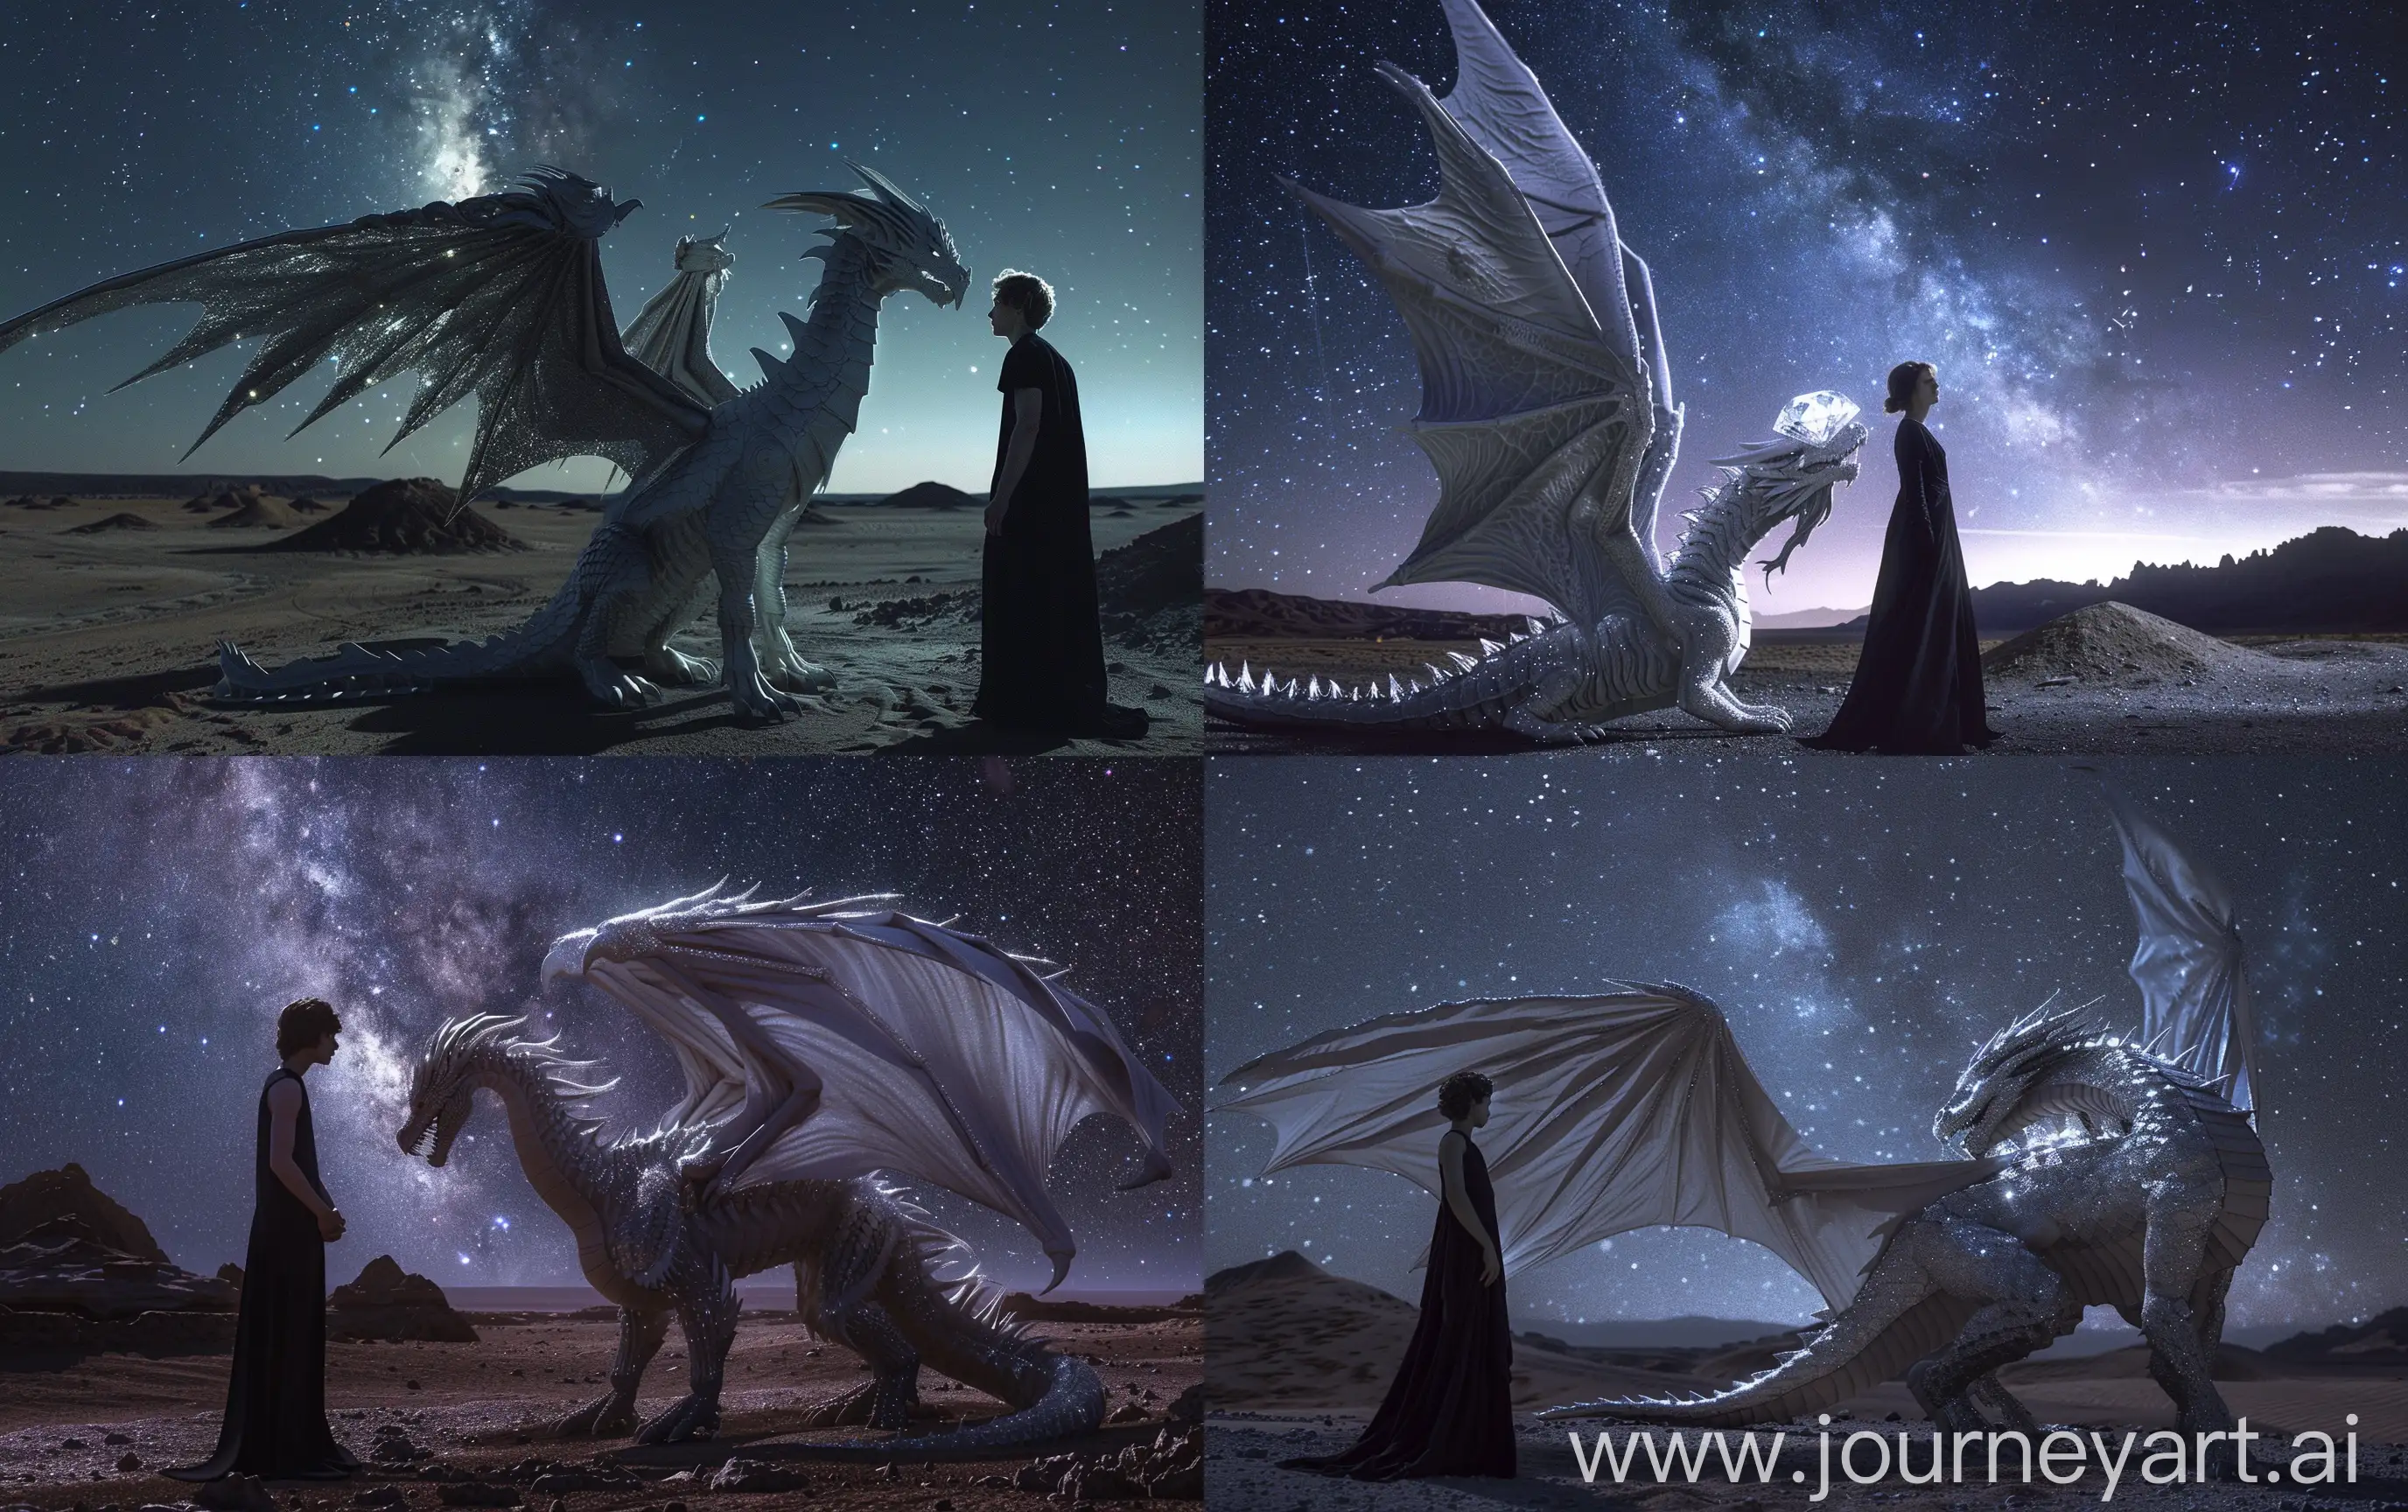 Majestic-Diamond-Dragon-Confronted-by-a-Young-Man-in-the-Dark-Desert-Night